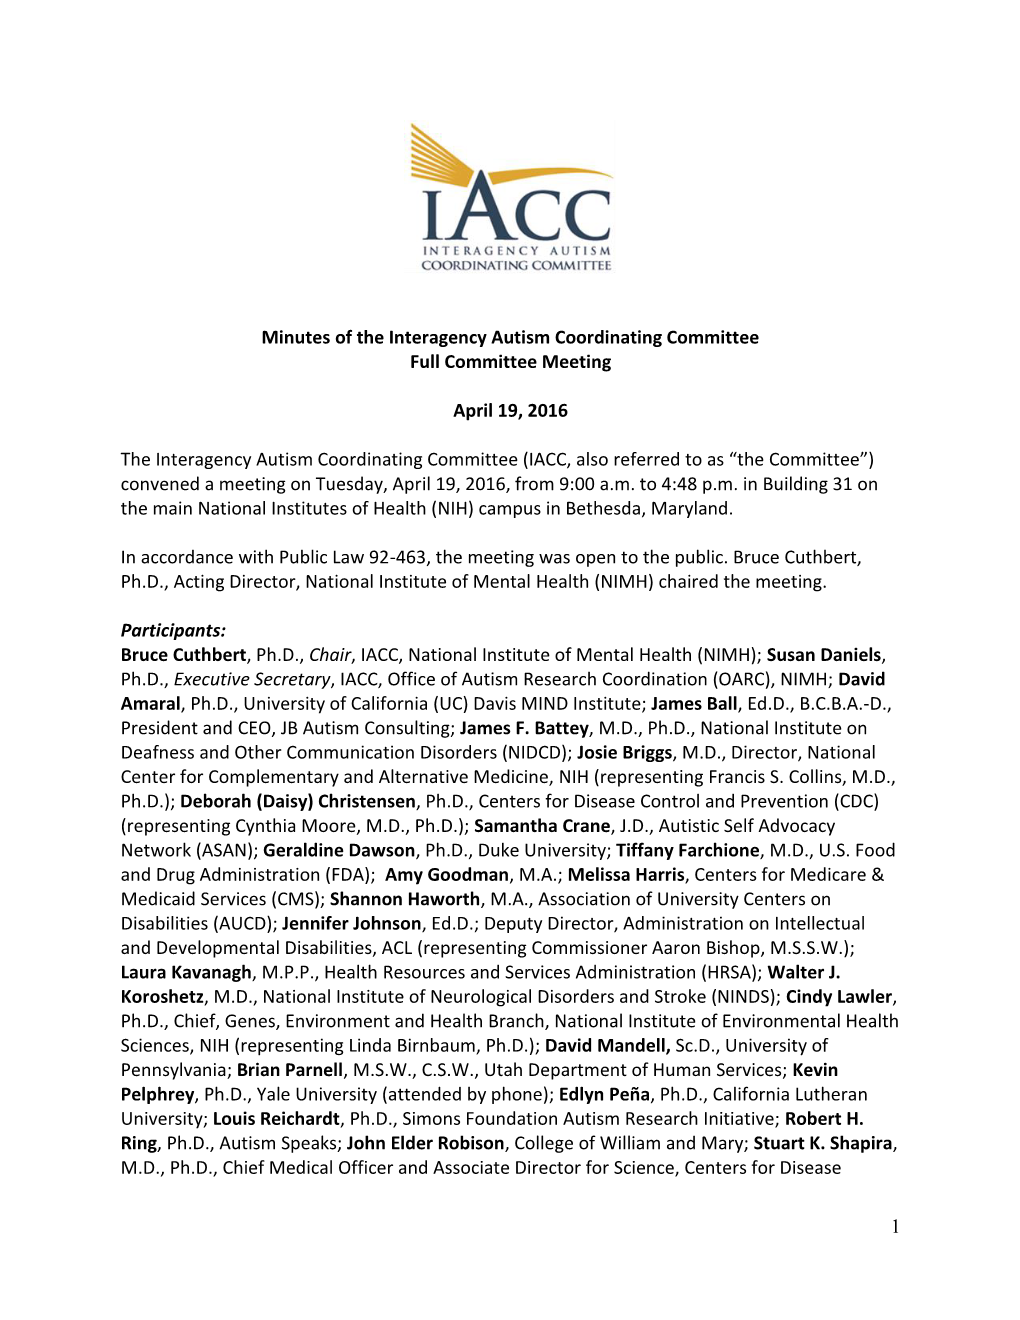 Minutes of the Interagency Autism Coordinating Committee Full Committee Meeting April 19, 2016